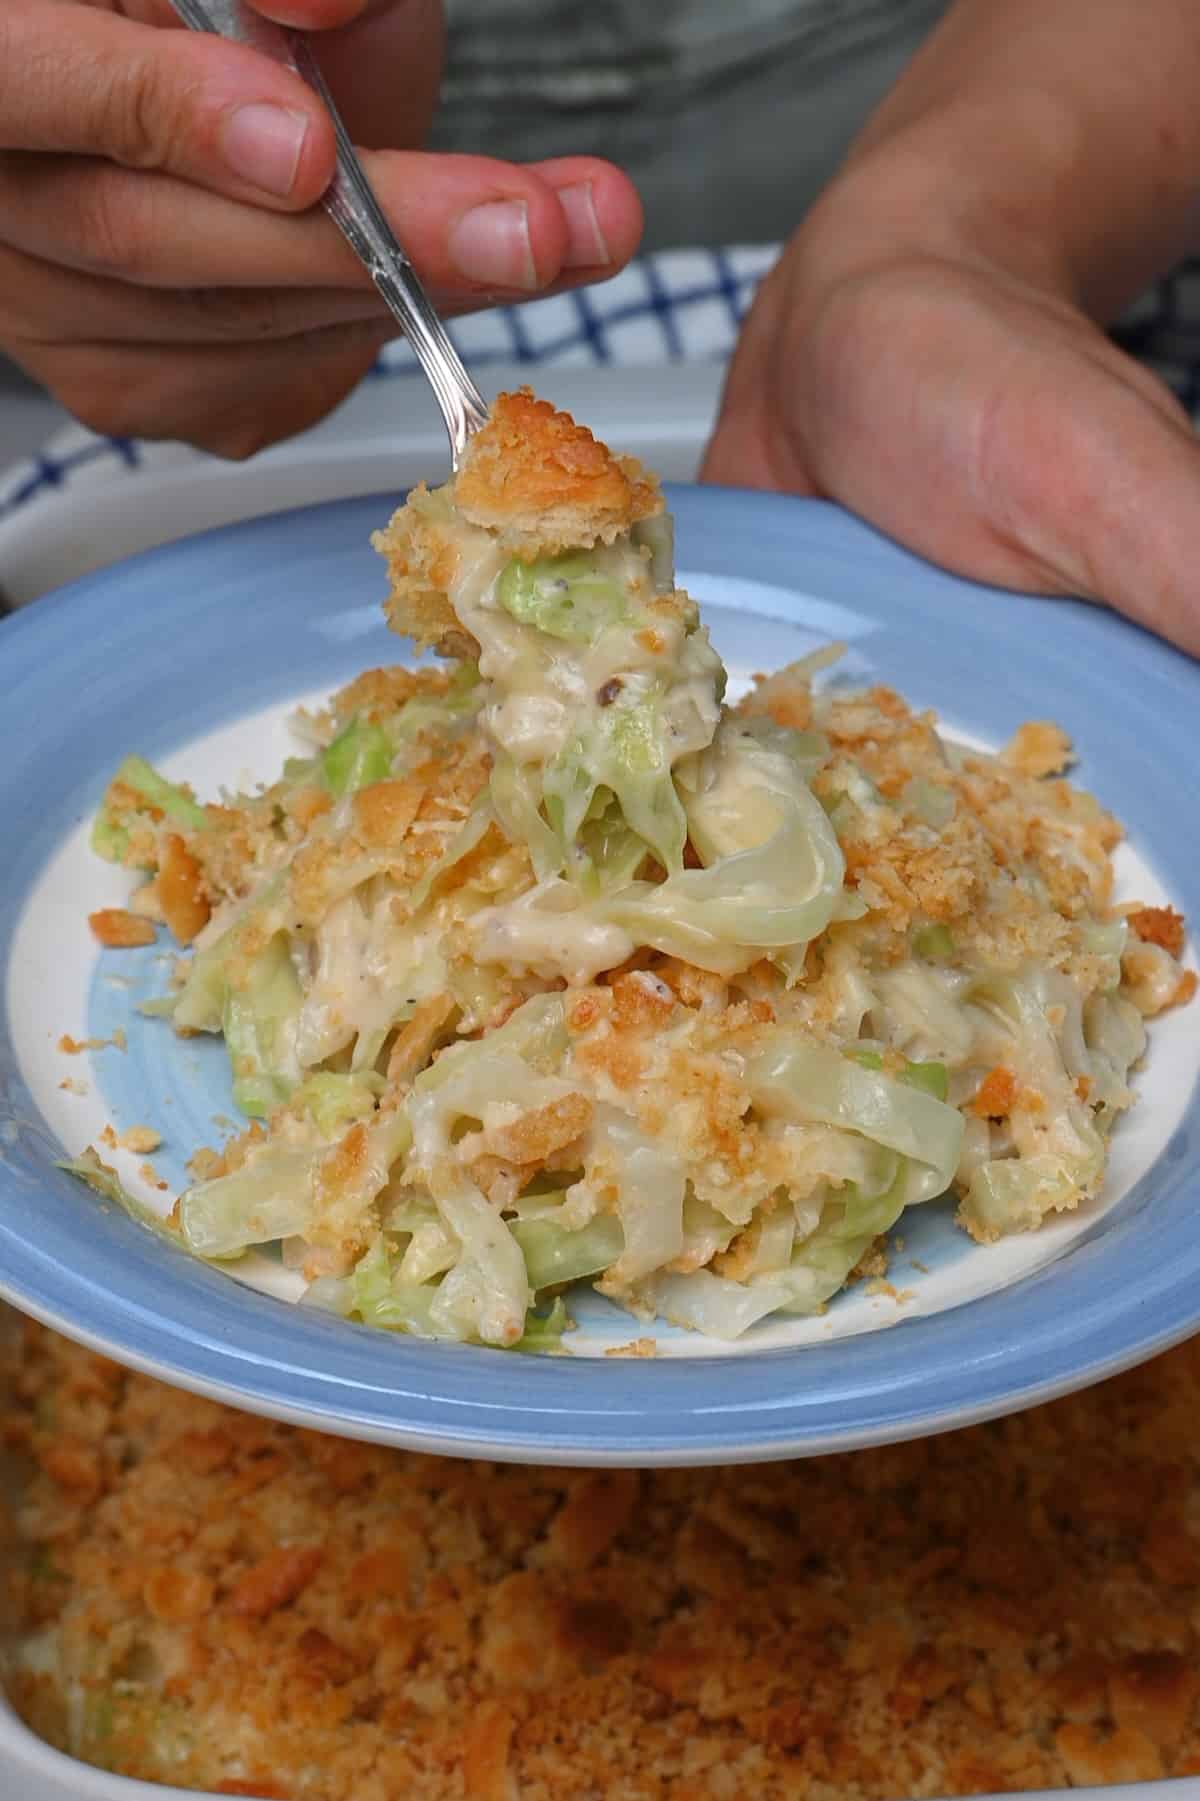 Serving cabbage casserole on a plate